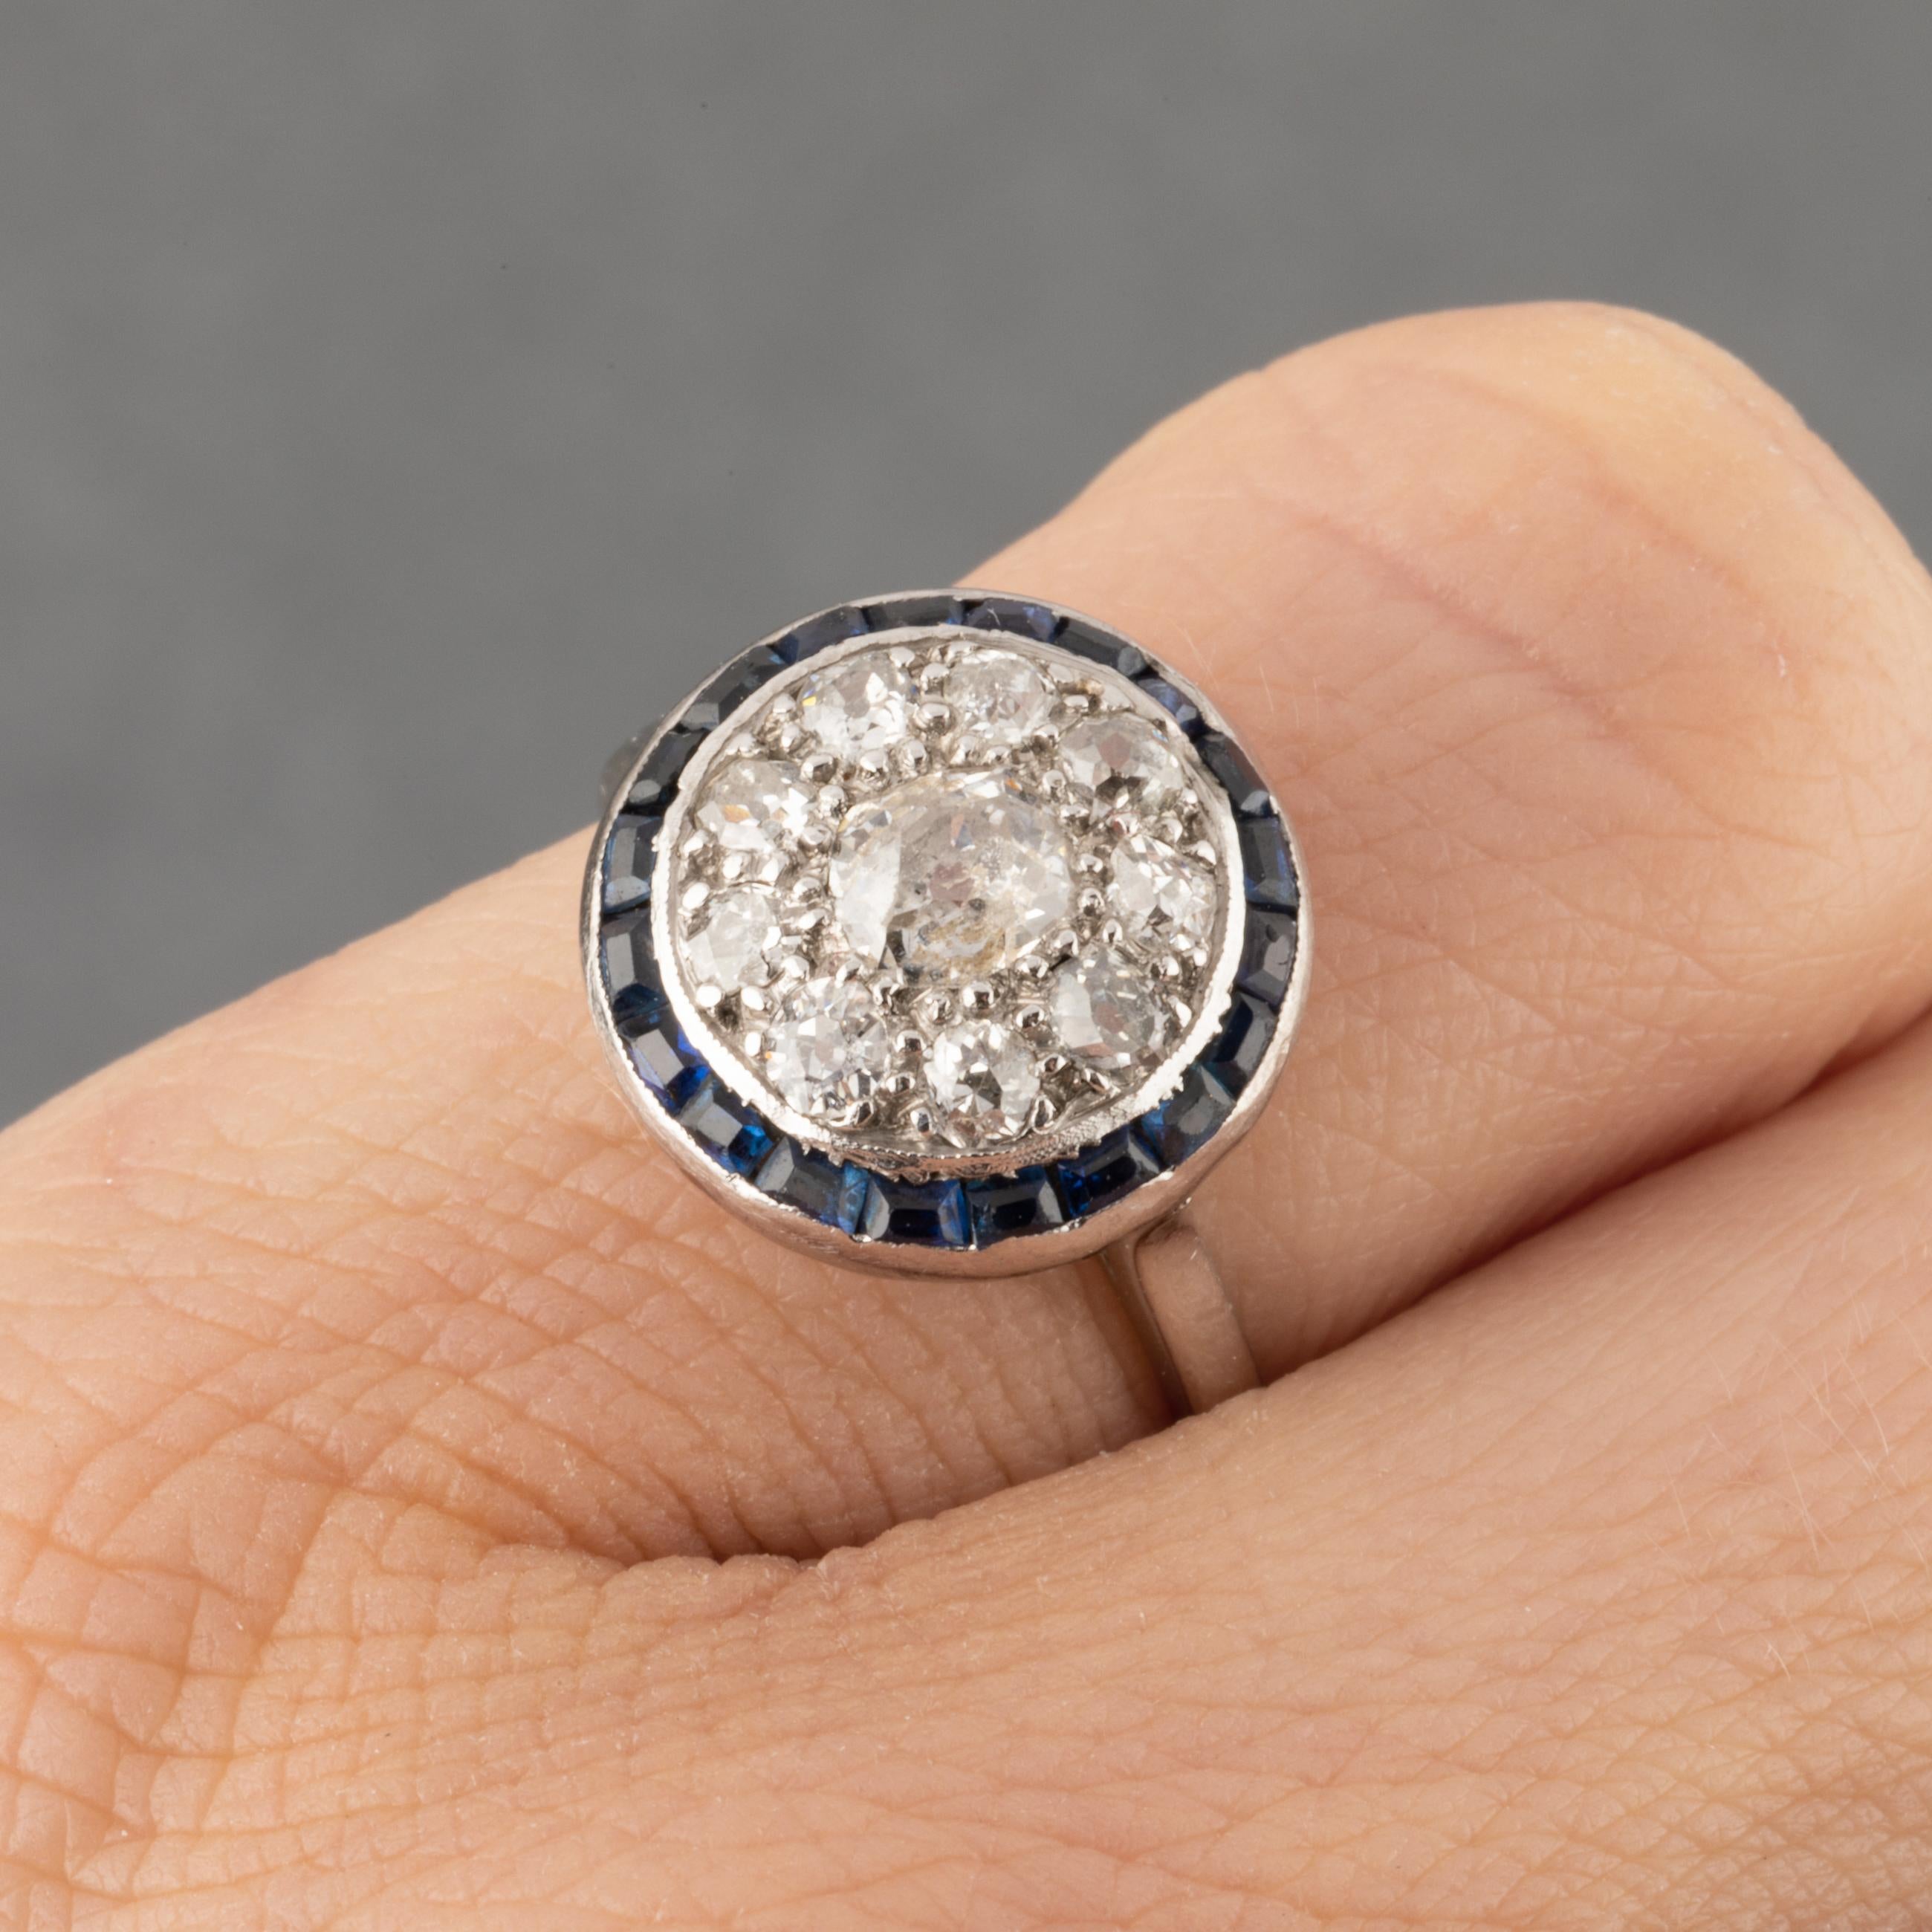 One very lovely antique ring, made in France circa 1920.
Made in white gold 18k (eagle head hallmark partly, Owl). 
The diamonds are Old European cut diamonds. 0.70/0.80 carats approximately.
The diameter of the front is 12mm.
Ring size is 49 or